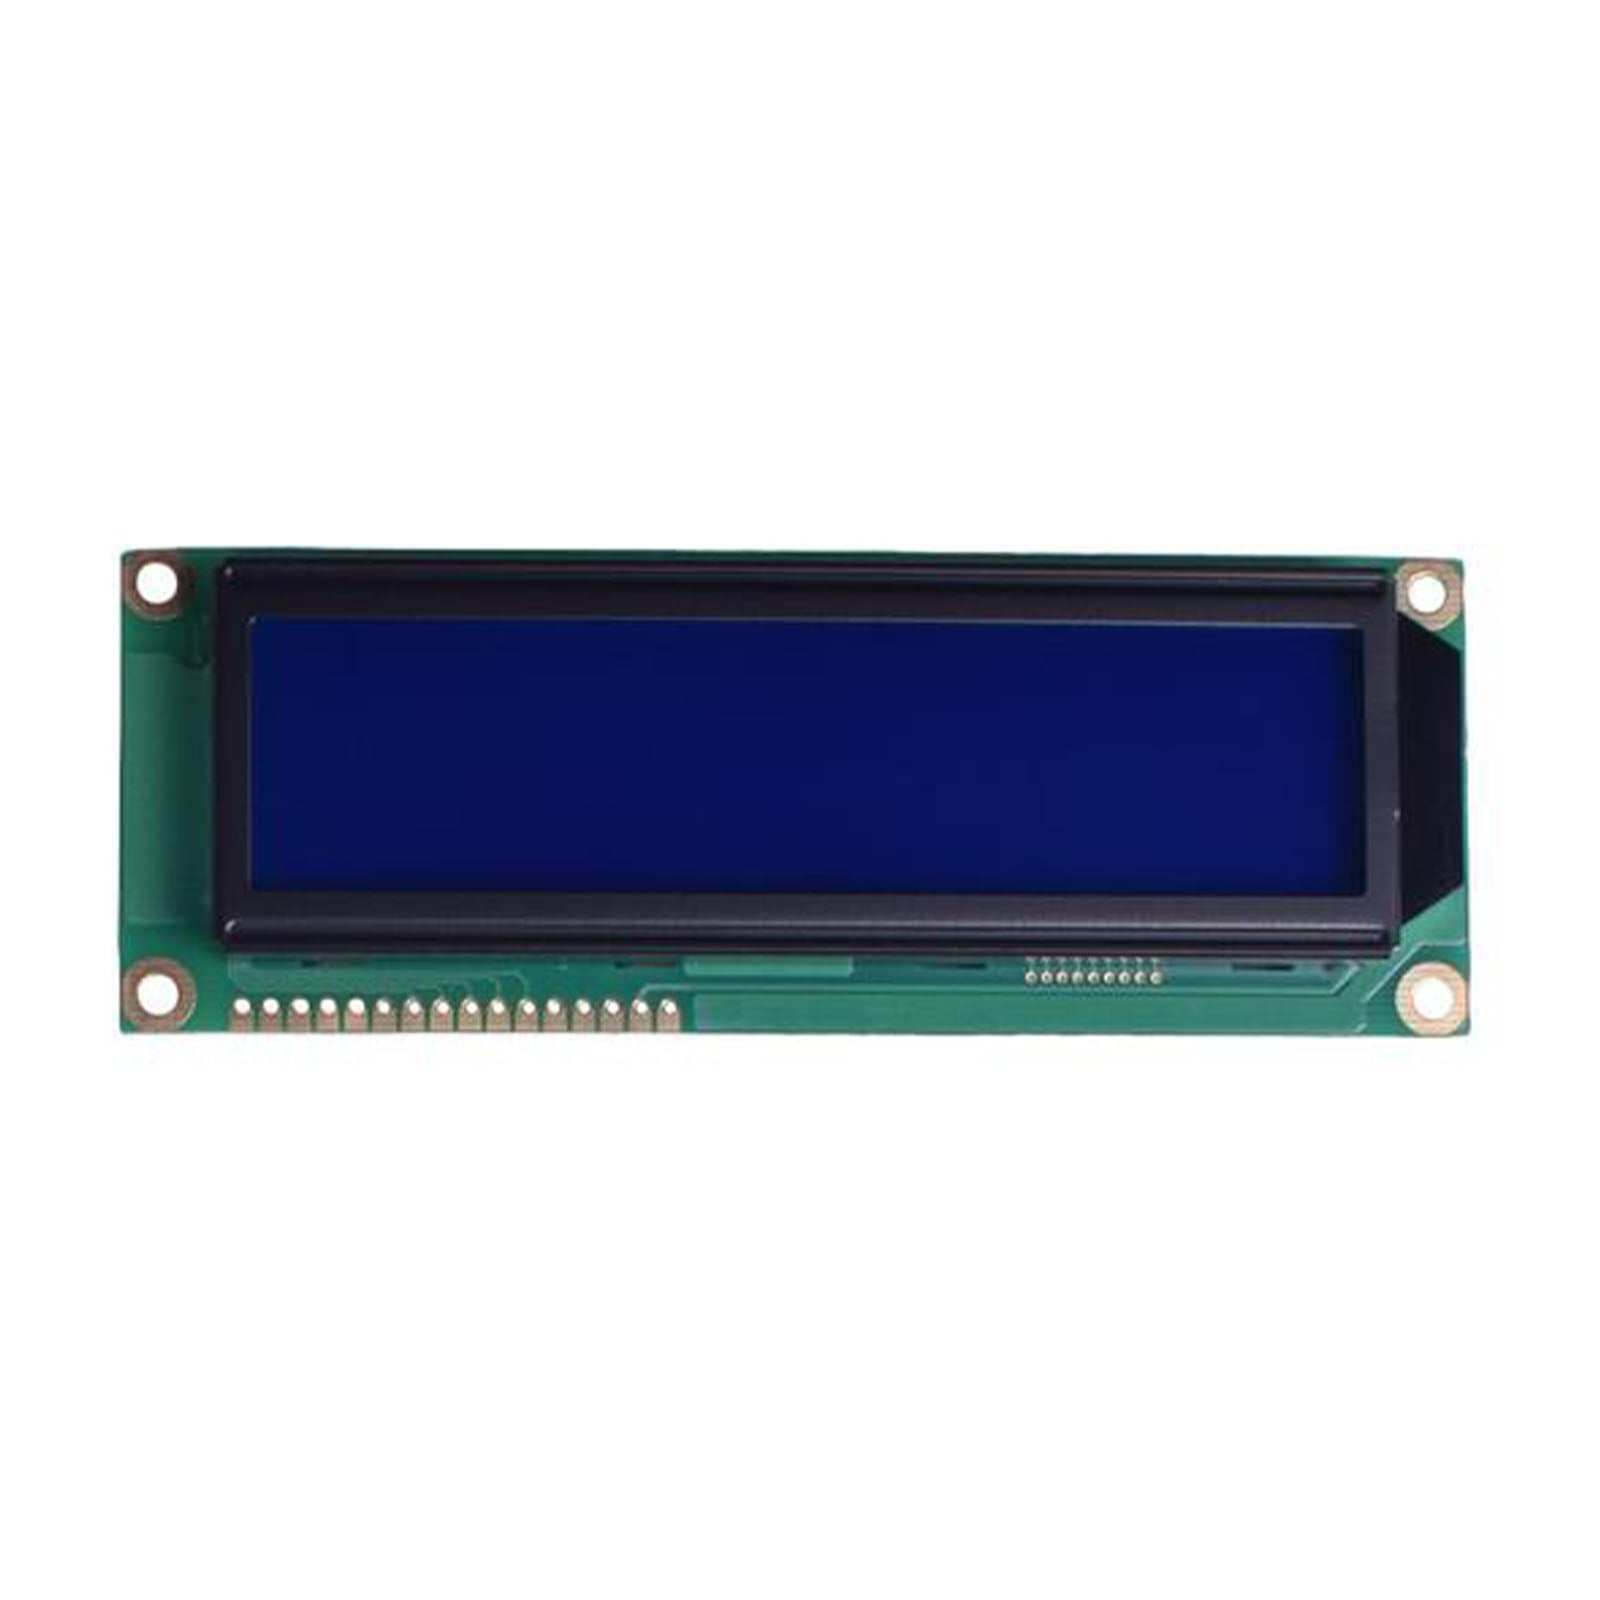 Blue large size 16x2 character LCD with FSTN transflective technology and MCU interface